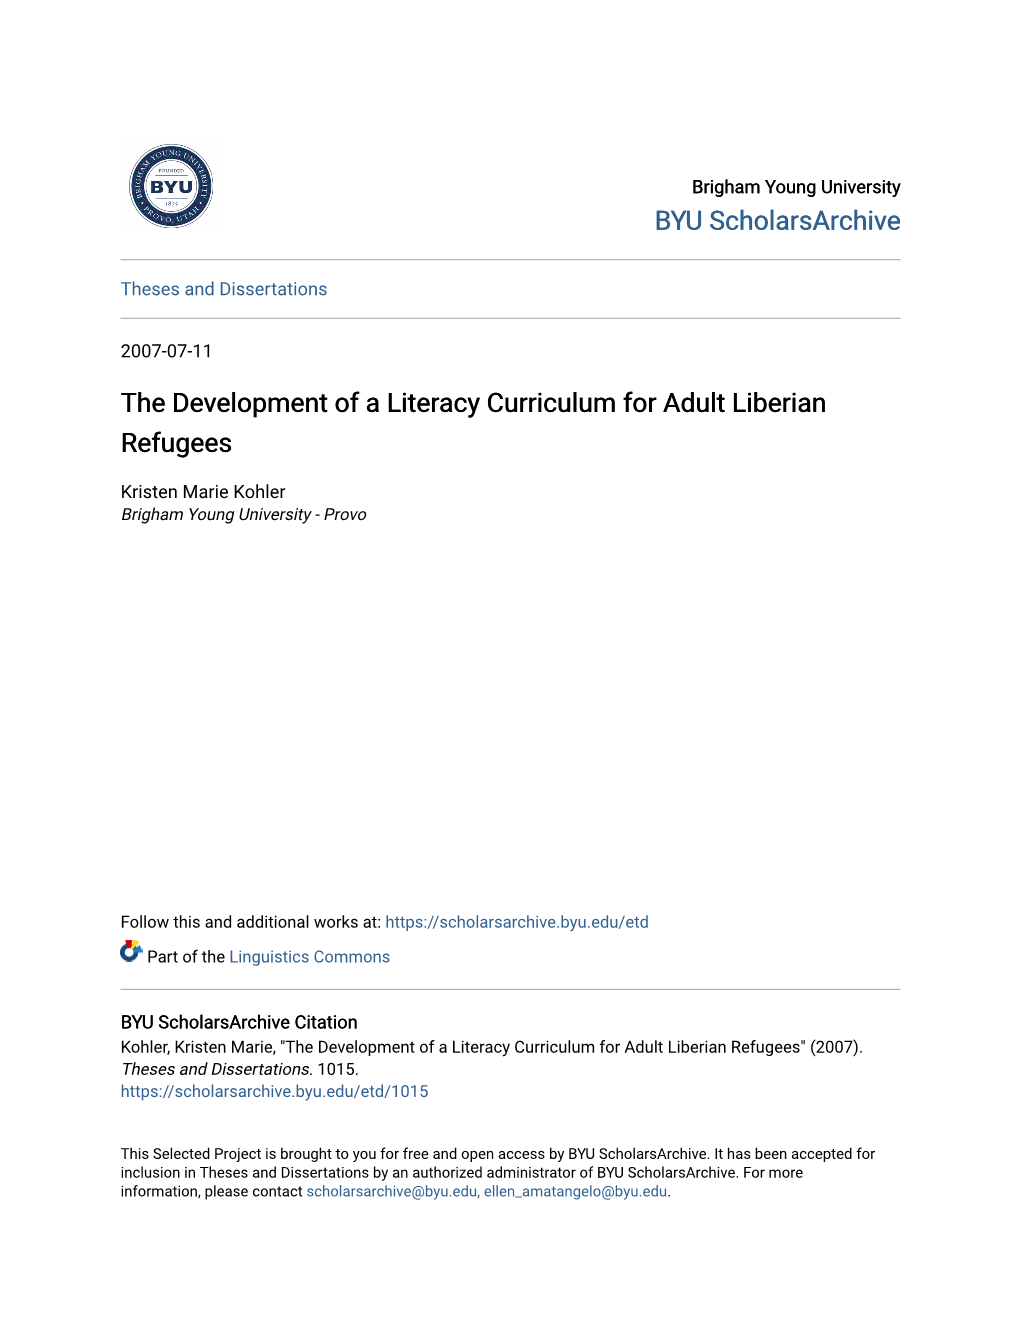 The Development of a Literacy Curriculum for Adult Liberian Refugees